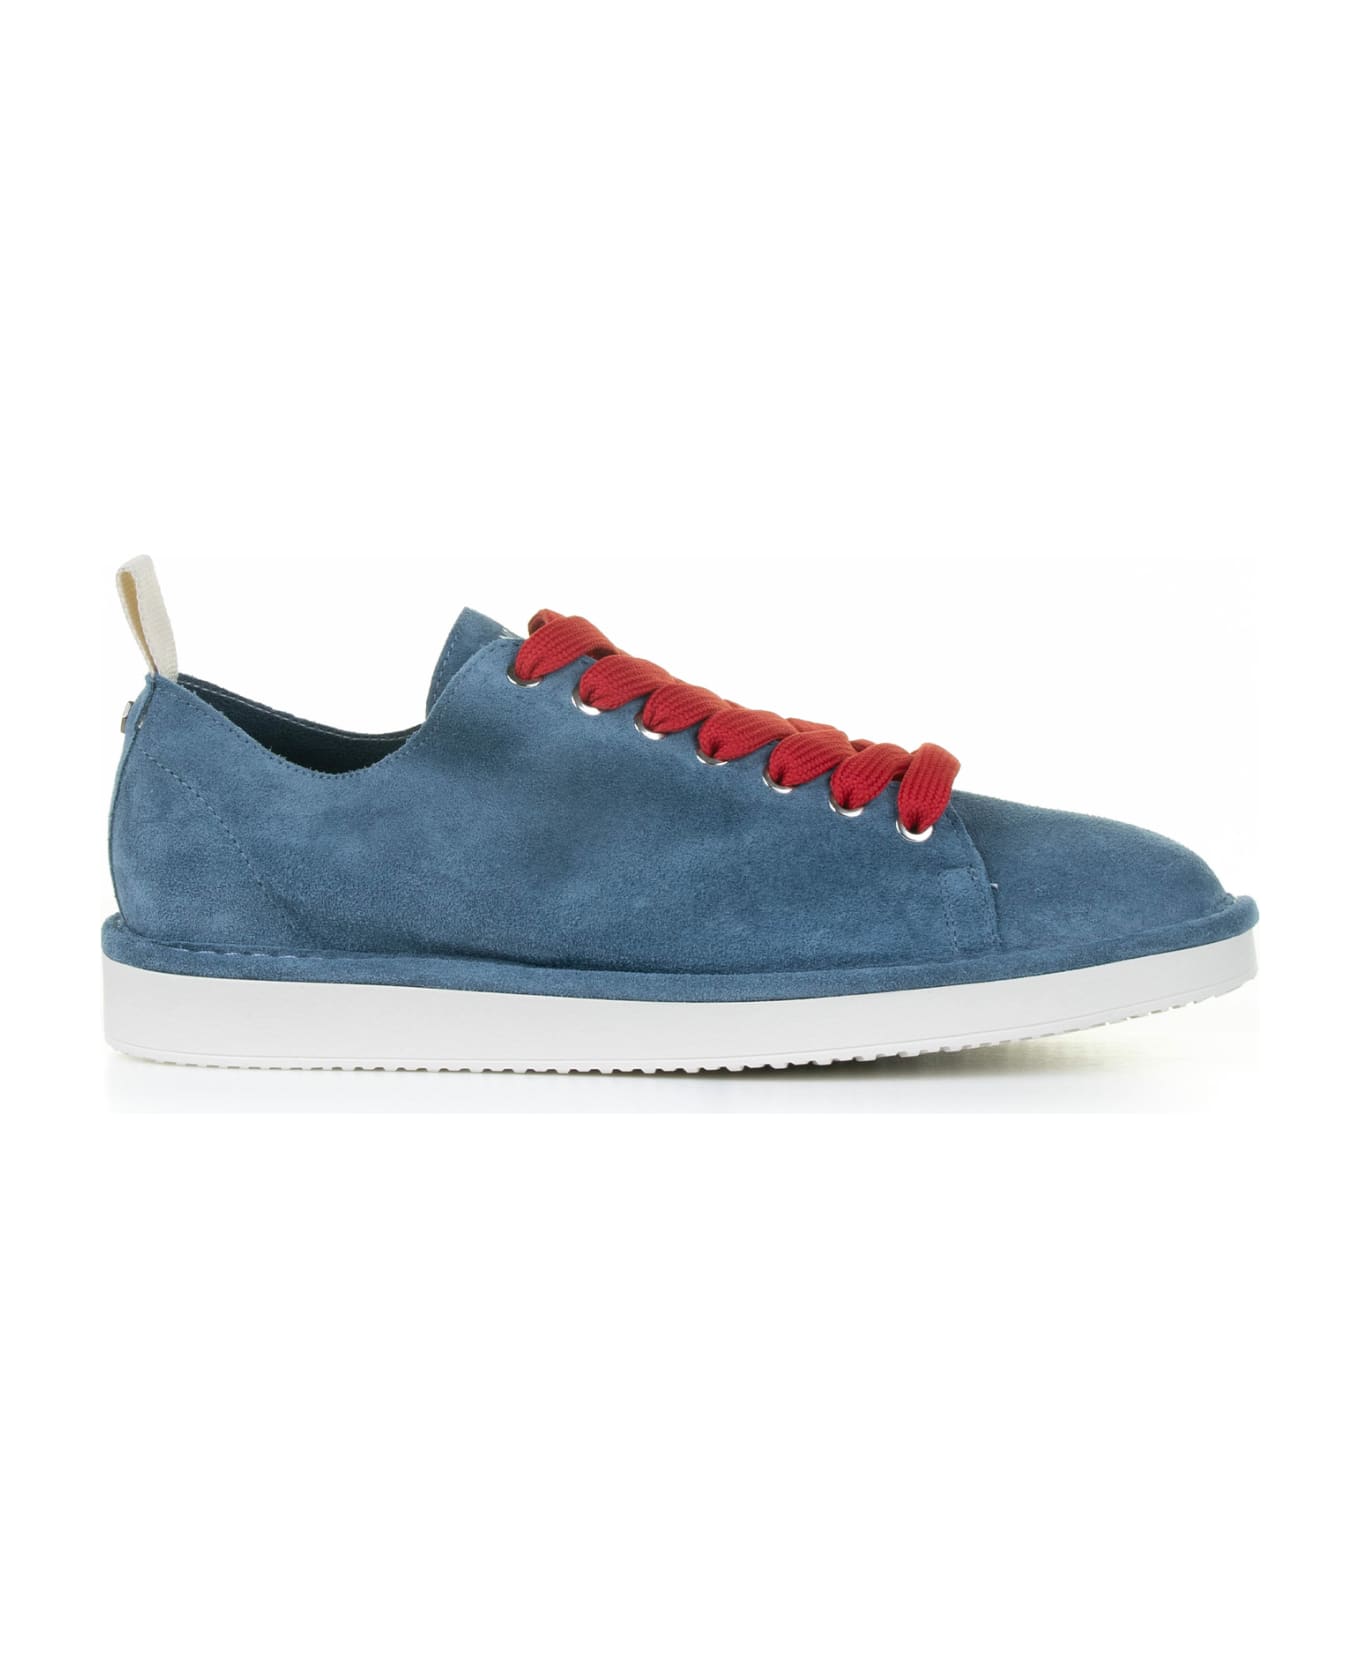 Panchic Sneaker In Blue Suede - BASIC BLUE- RED